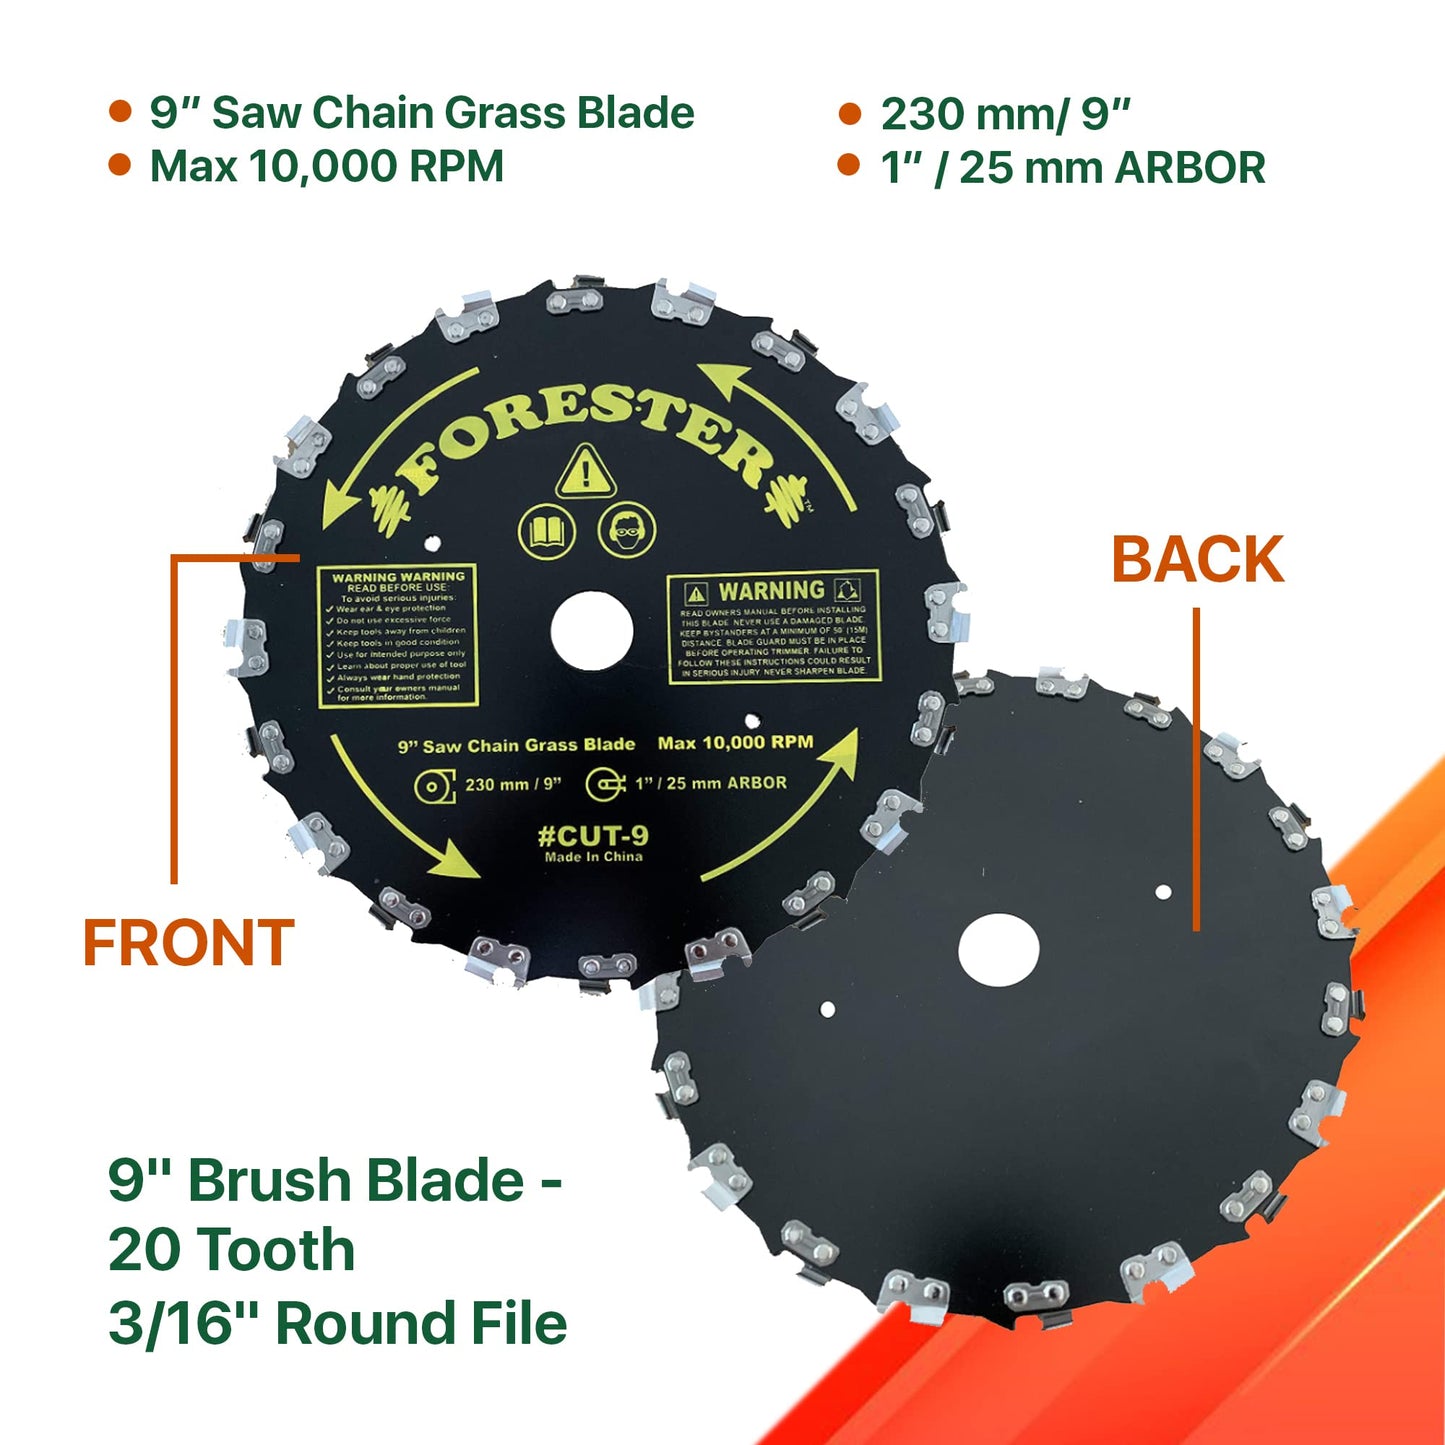 FORESTER Brush Cutter Blades and File Set - Trimmer Chainsaw Tooth Saw Blade ...